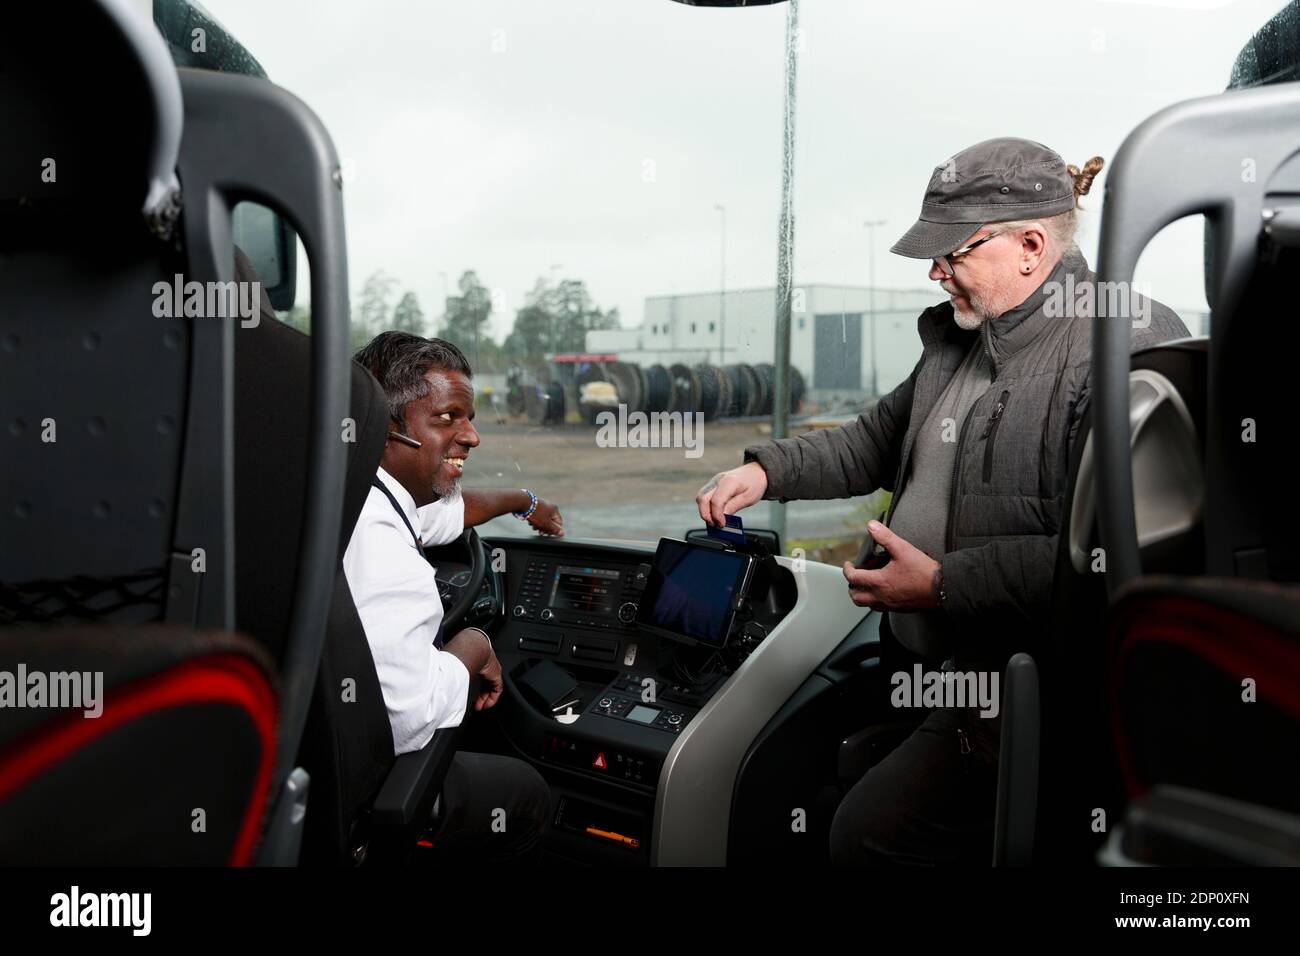 Passenger talking to driver in bus Stock Photo